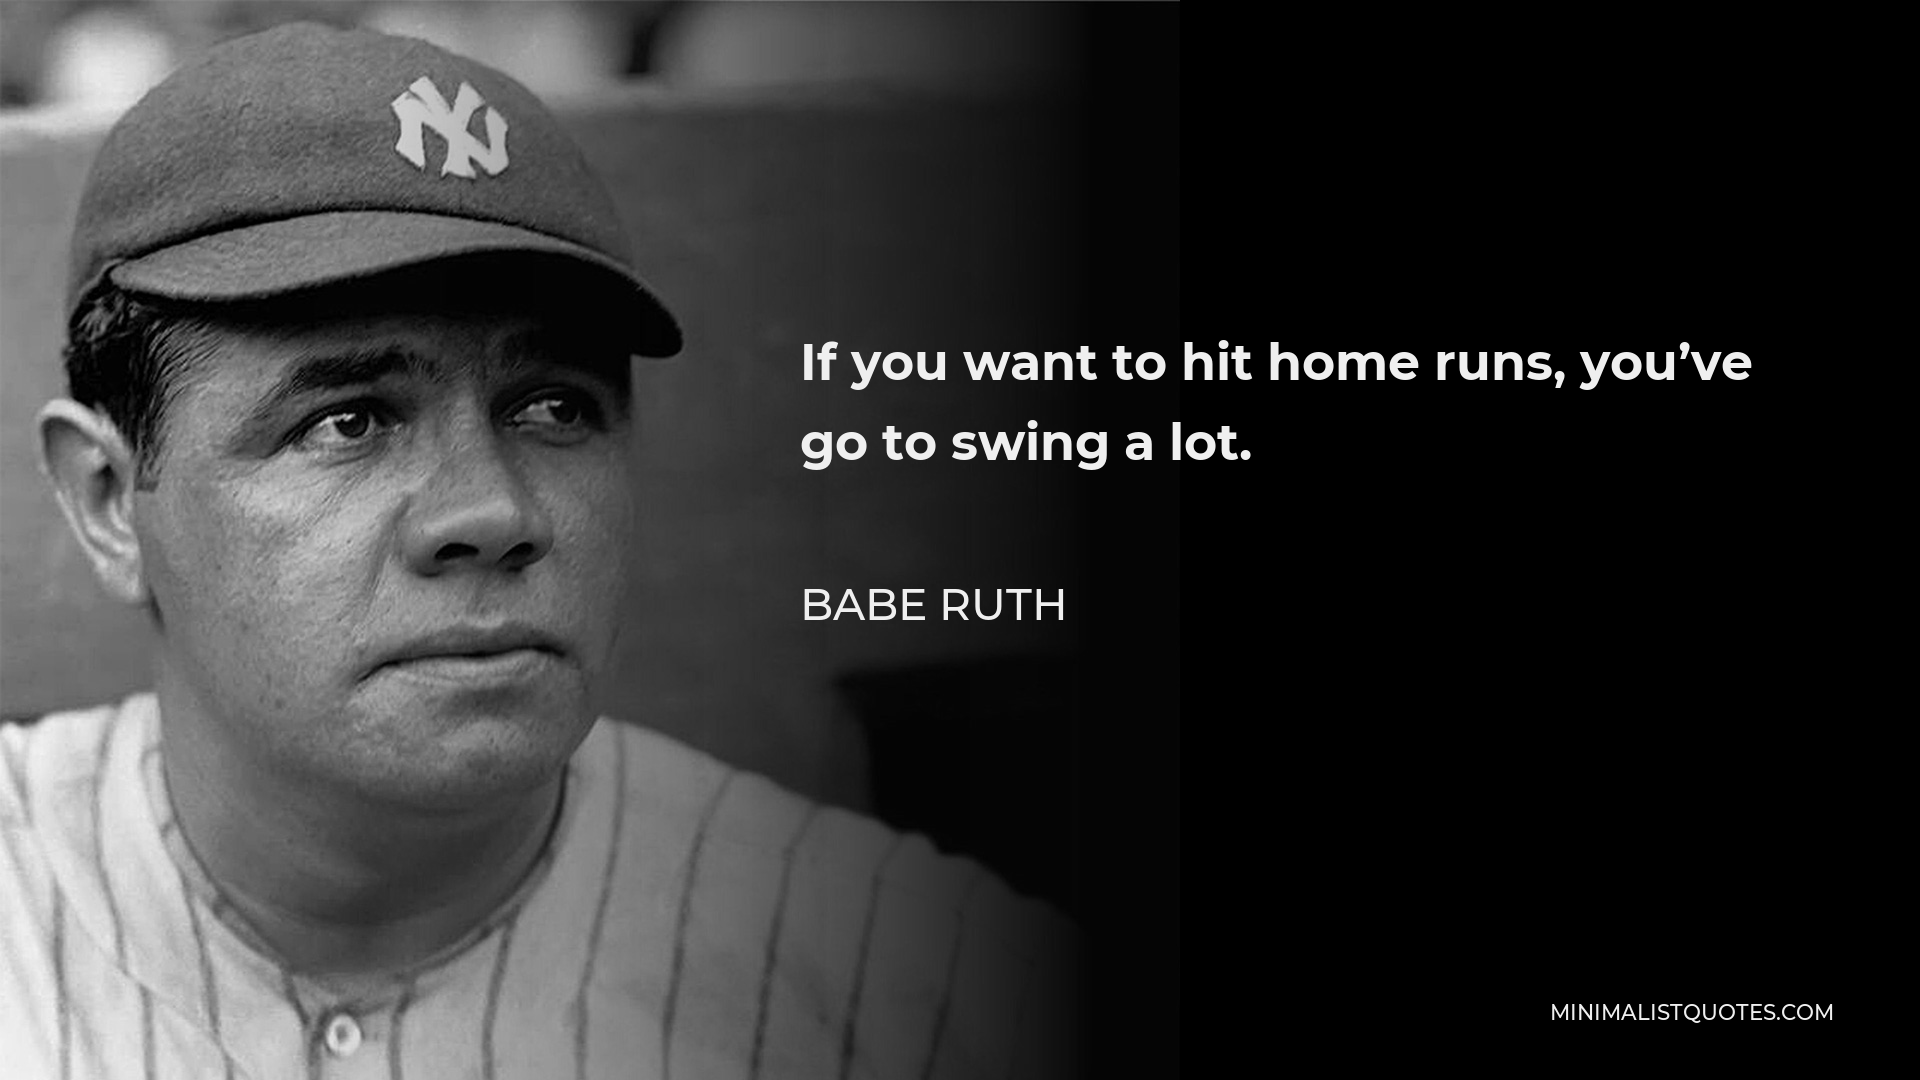 Babe Ruth Quote - If you want to hit home runs, you’ve go to swing a lot.